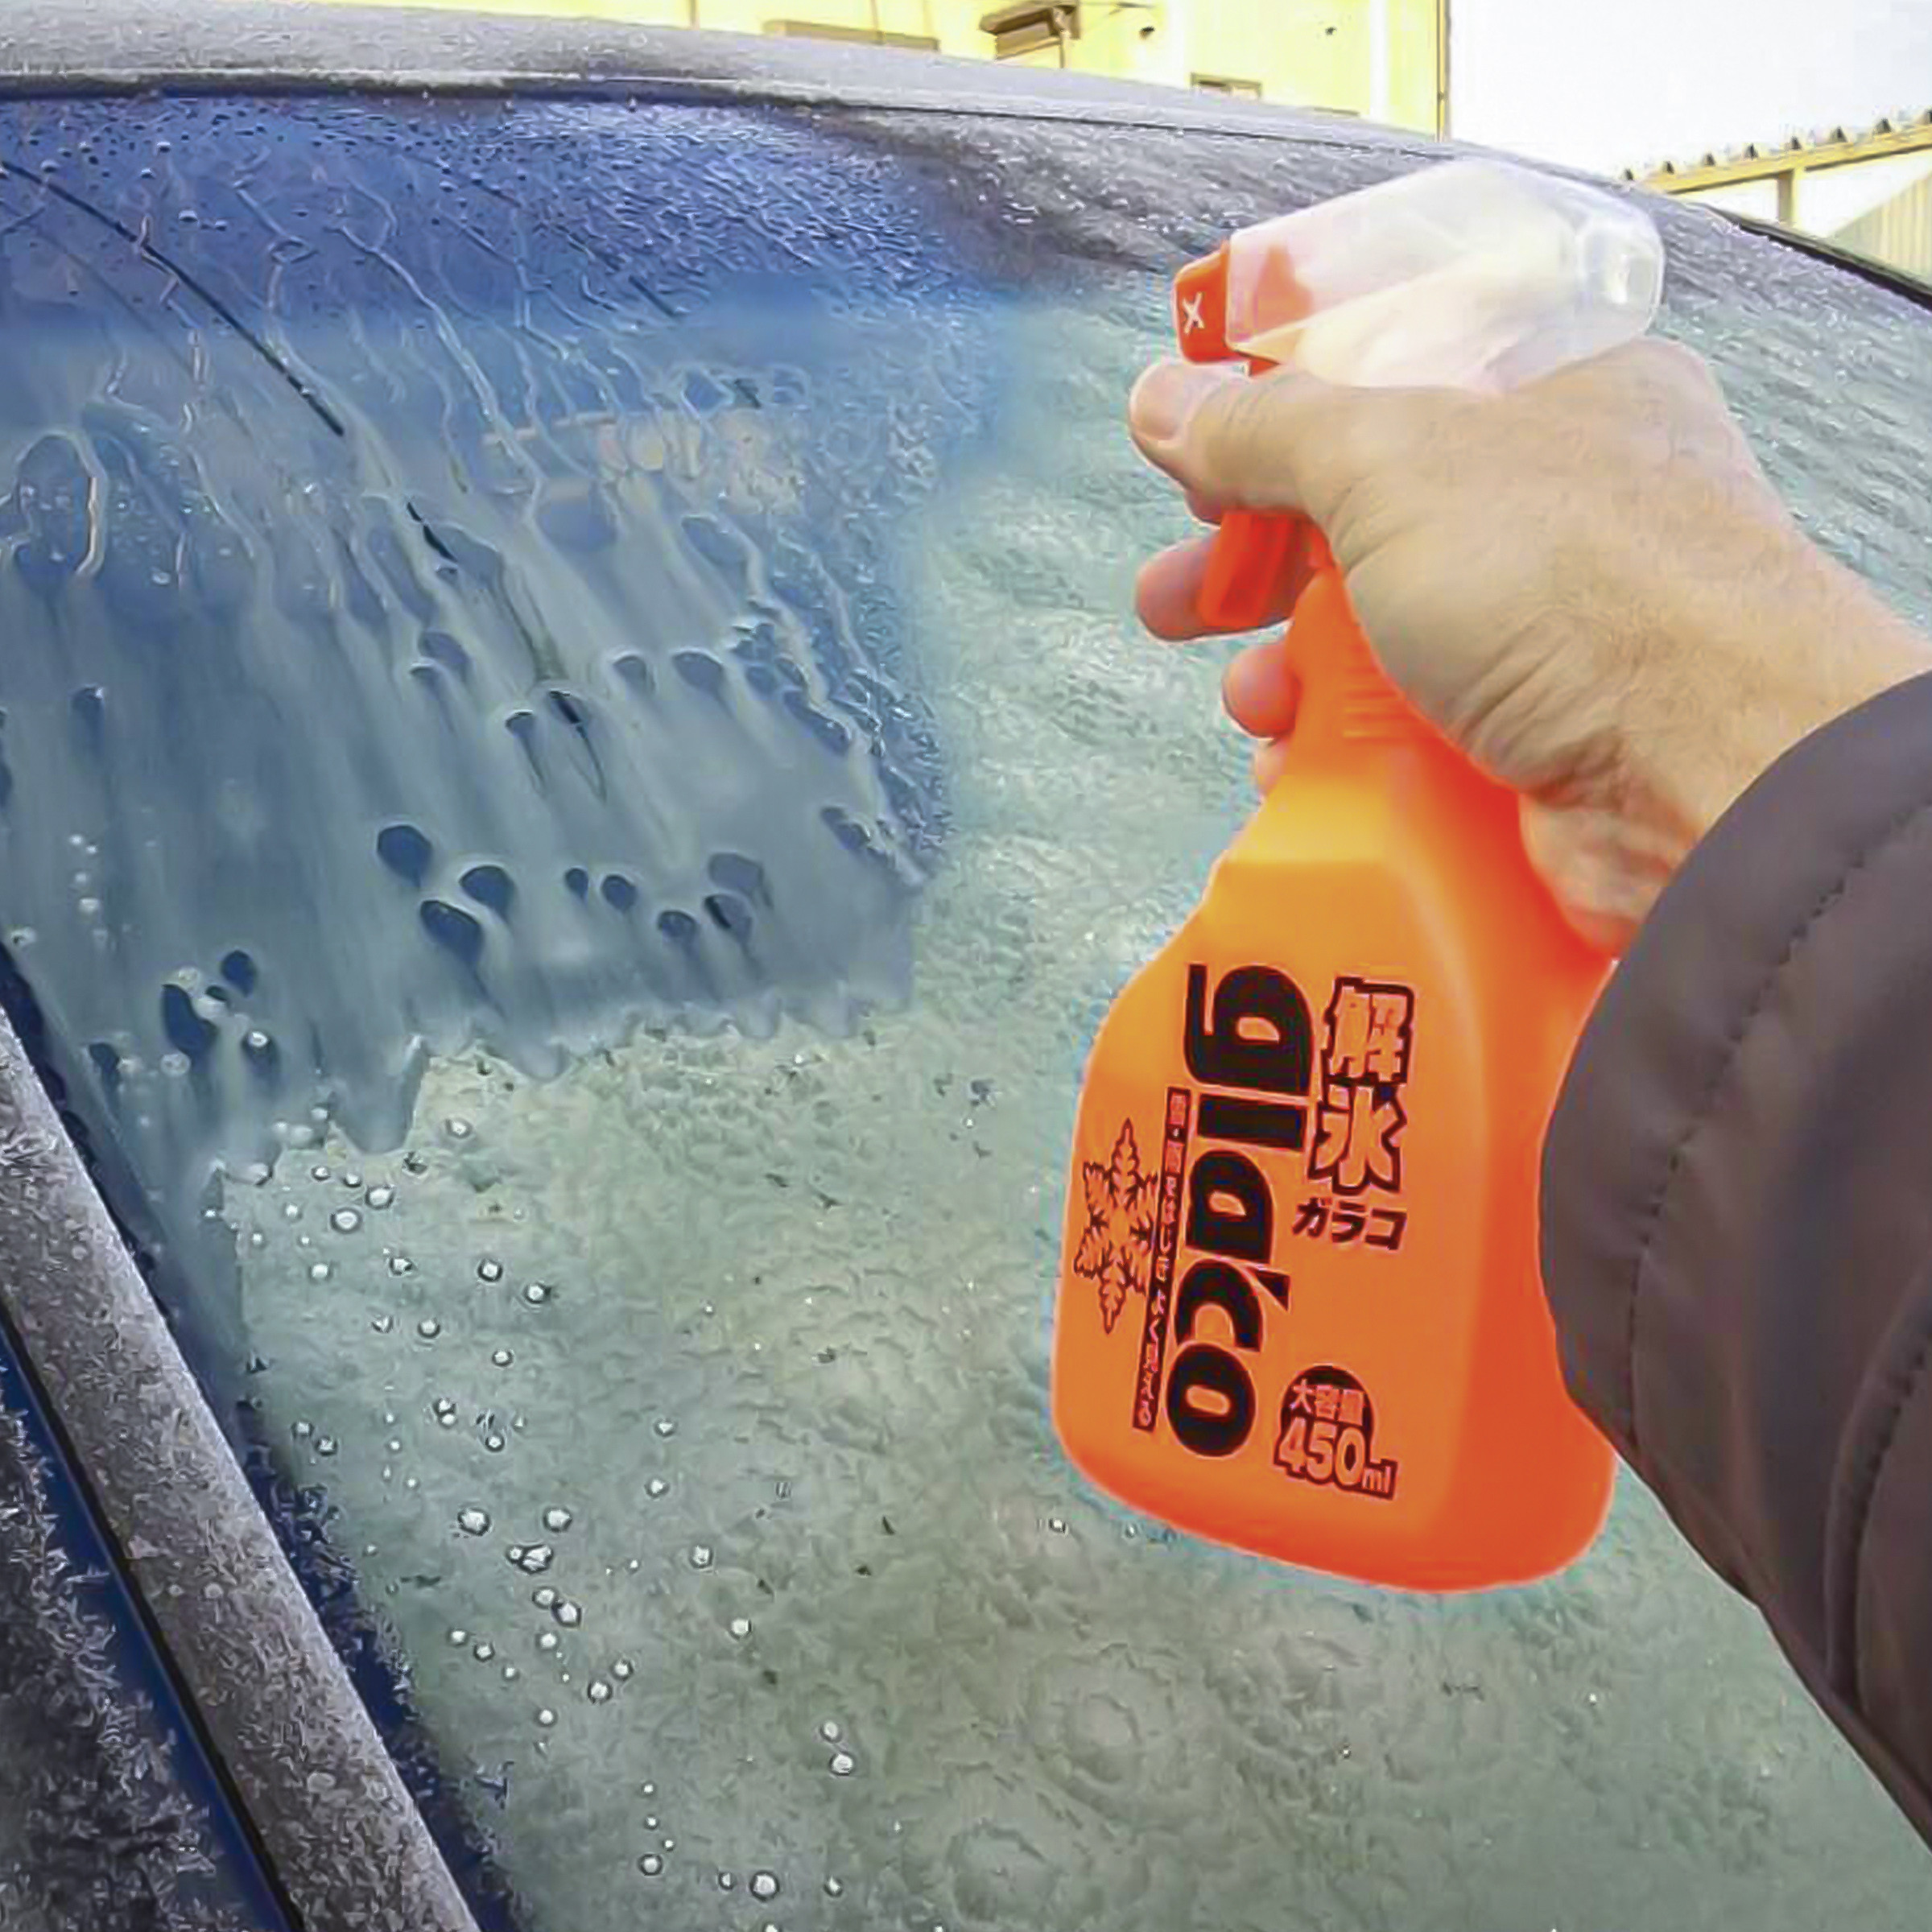 Glaco Glass Compound Roll On, Soft99 Glaco Glass Compound Roll On Restock  Now.. - Water Mark Remover - Powerfully Removes Greasy Dirt - Easy To Apply  - Make Your Windscreen Crystal, By Soft99 KL